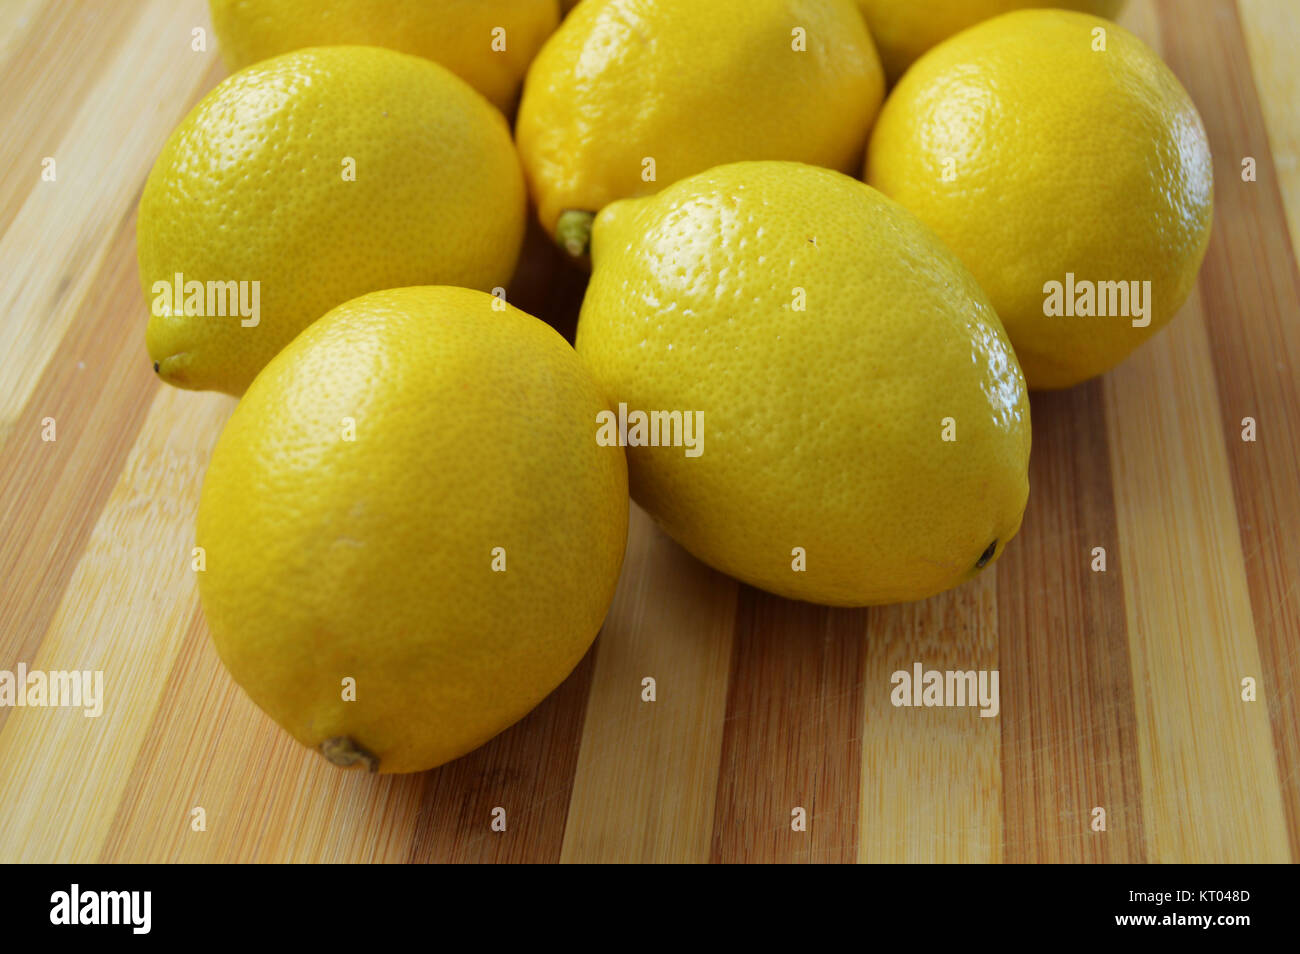 Lemons pictures Stock Photo